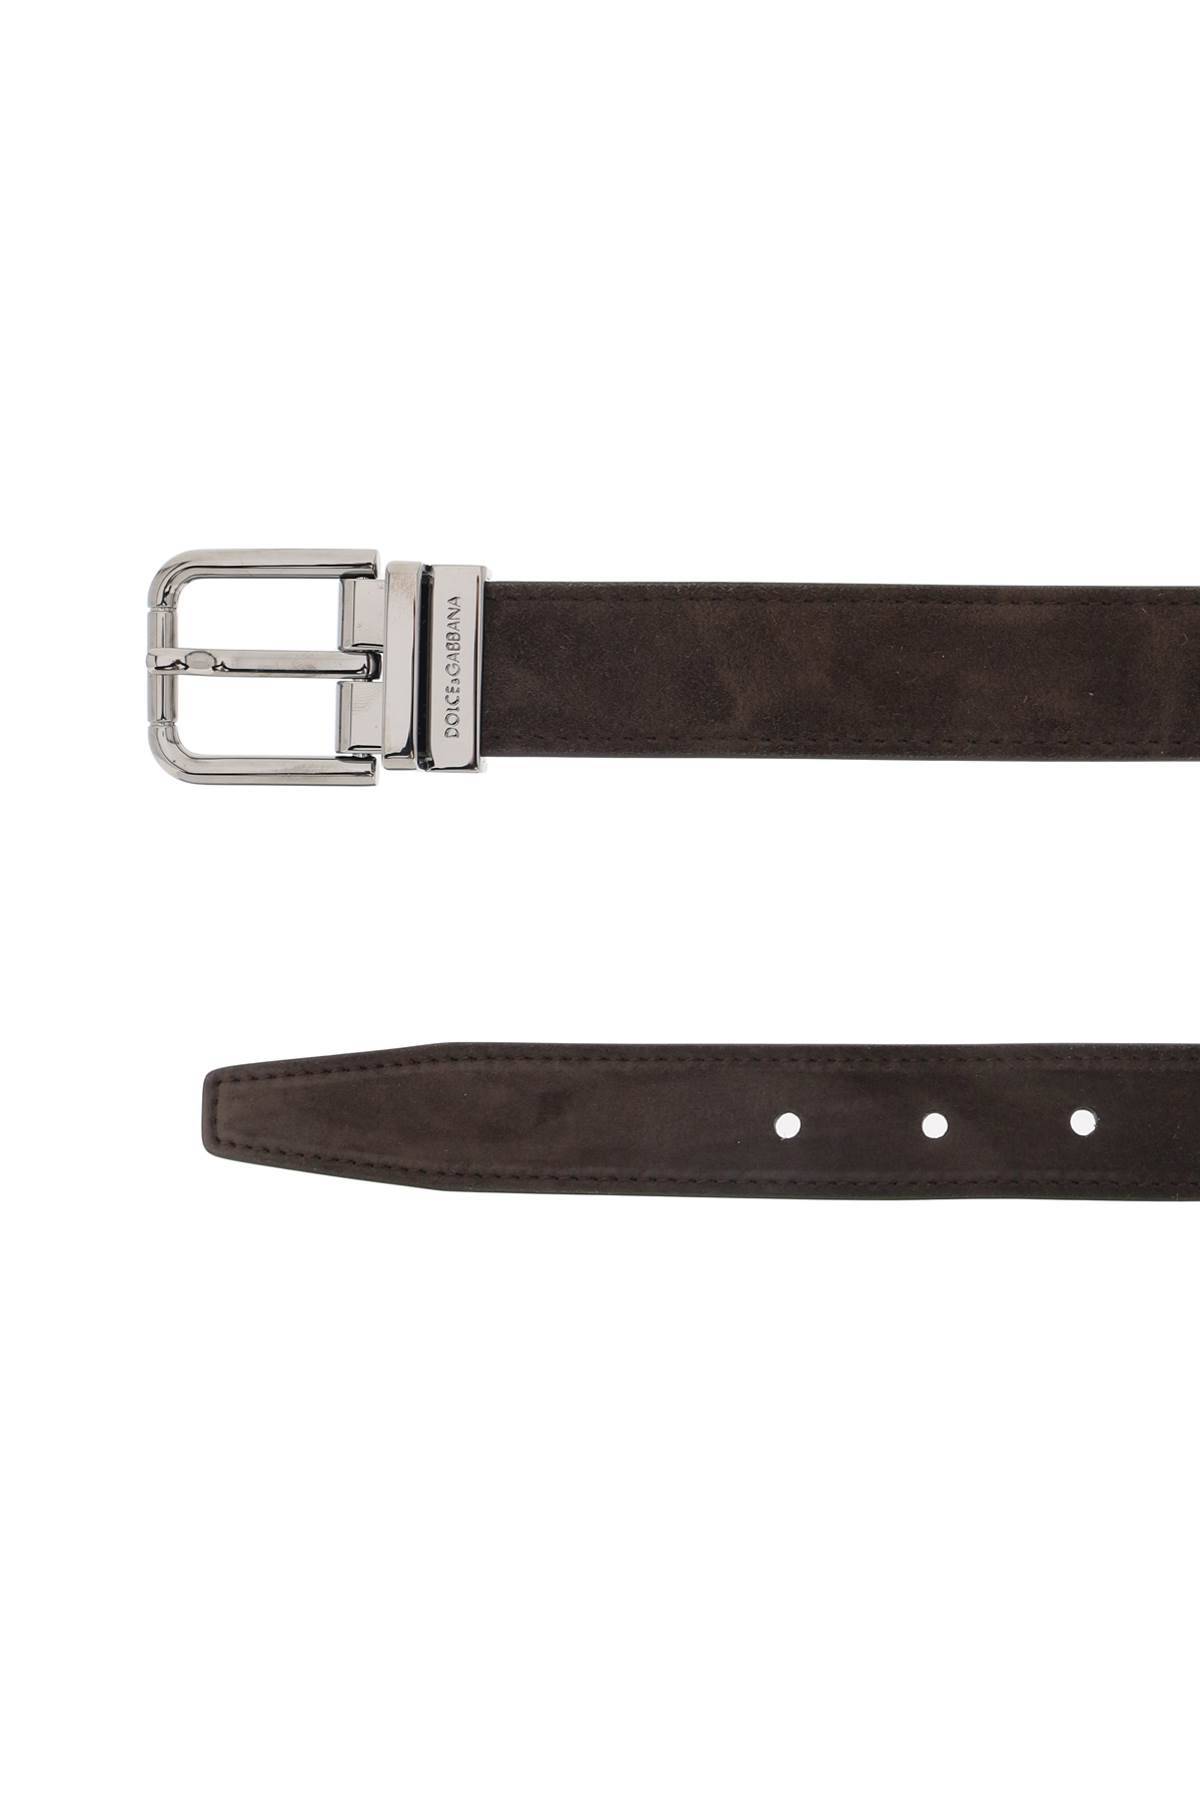 Shop Dolce & Gabbana Suede Belt For Stylish In Brown